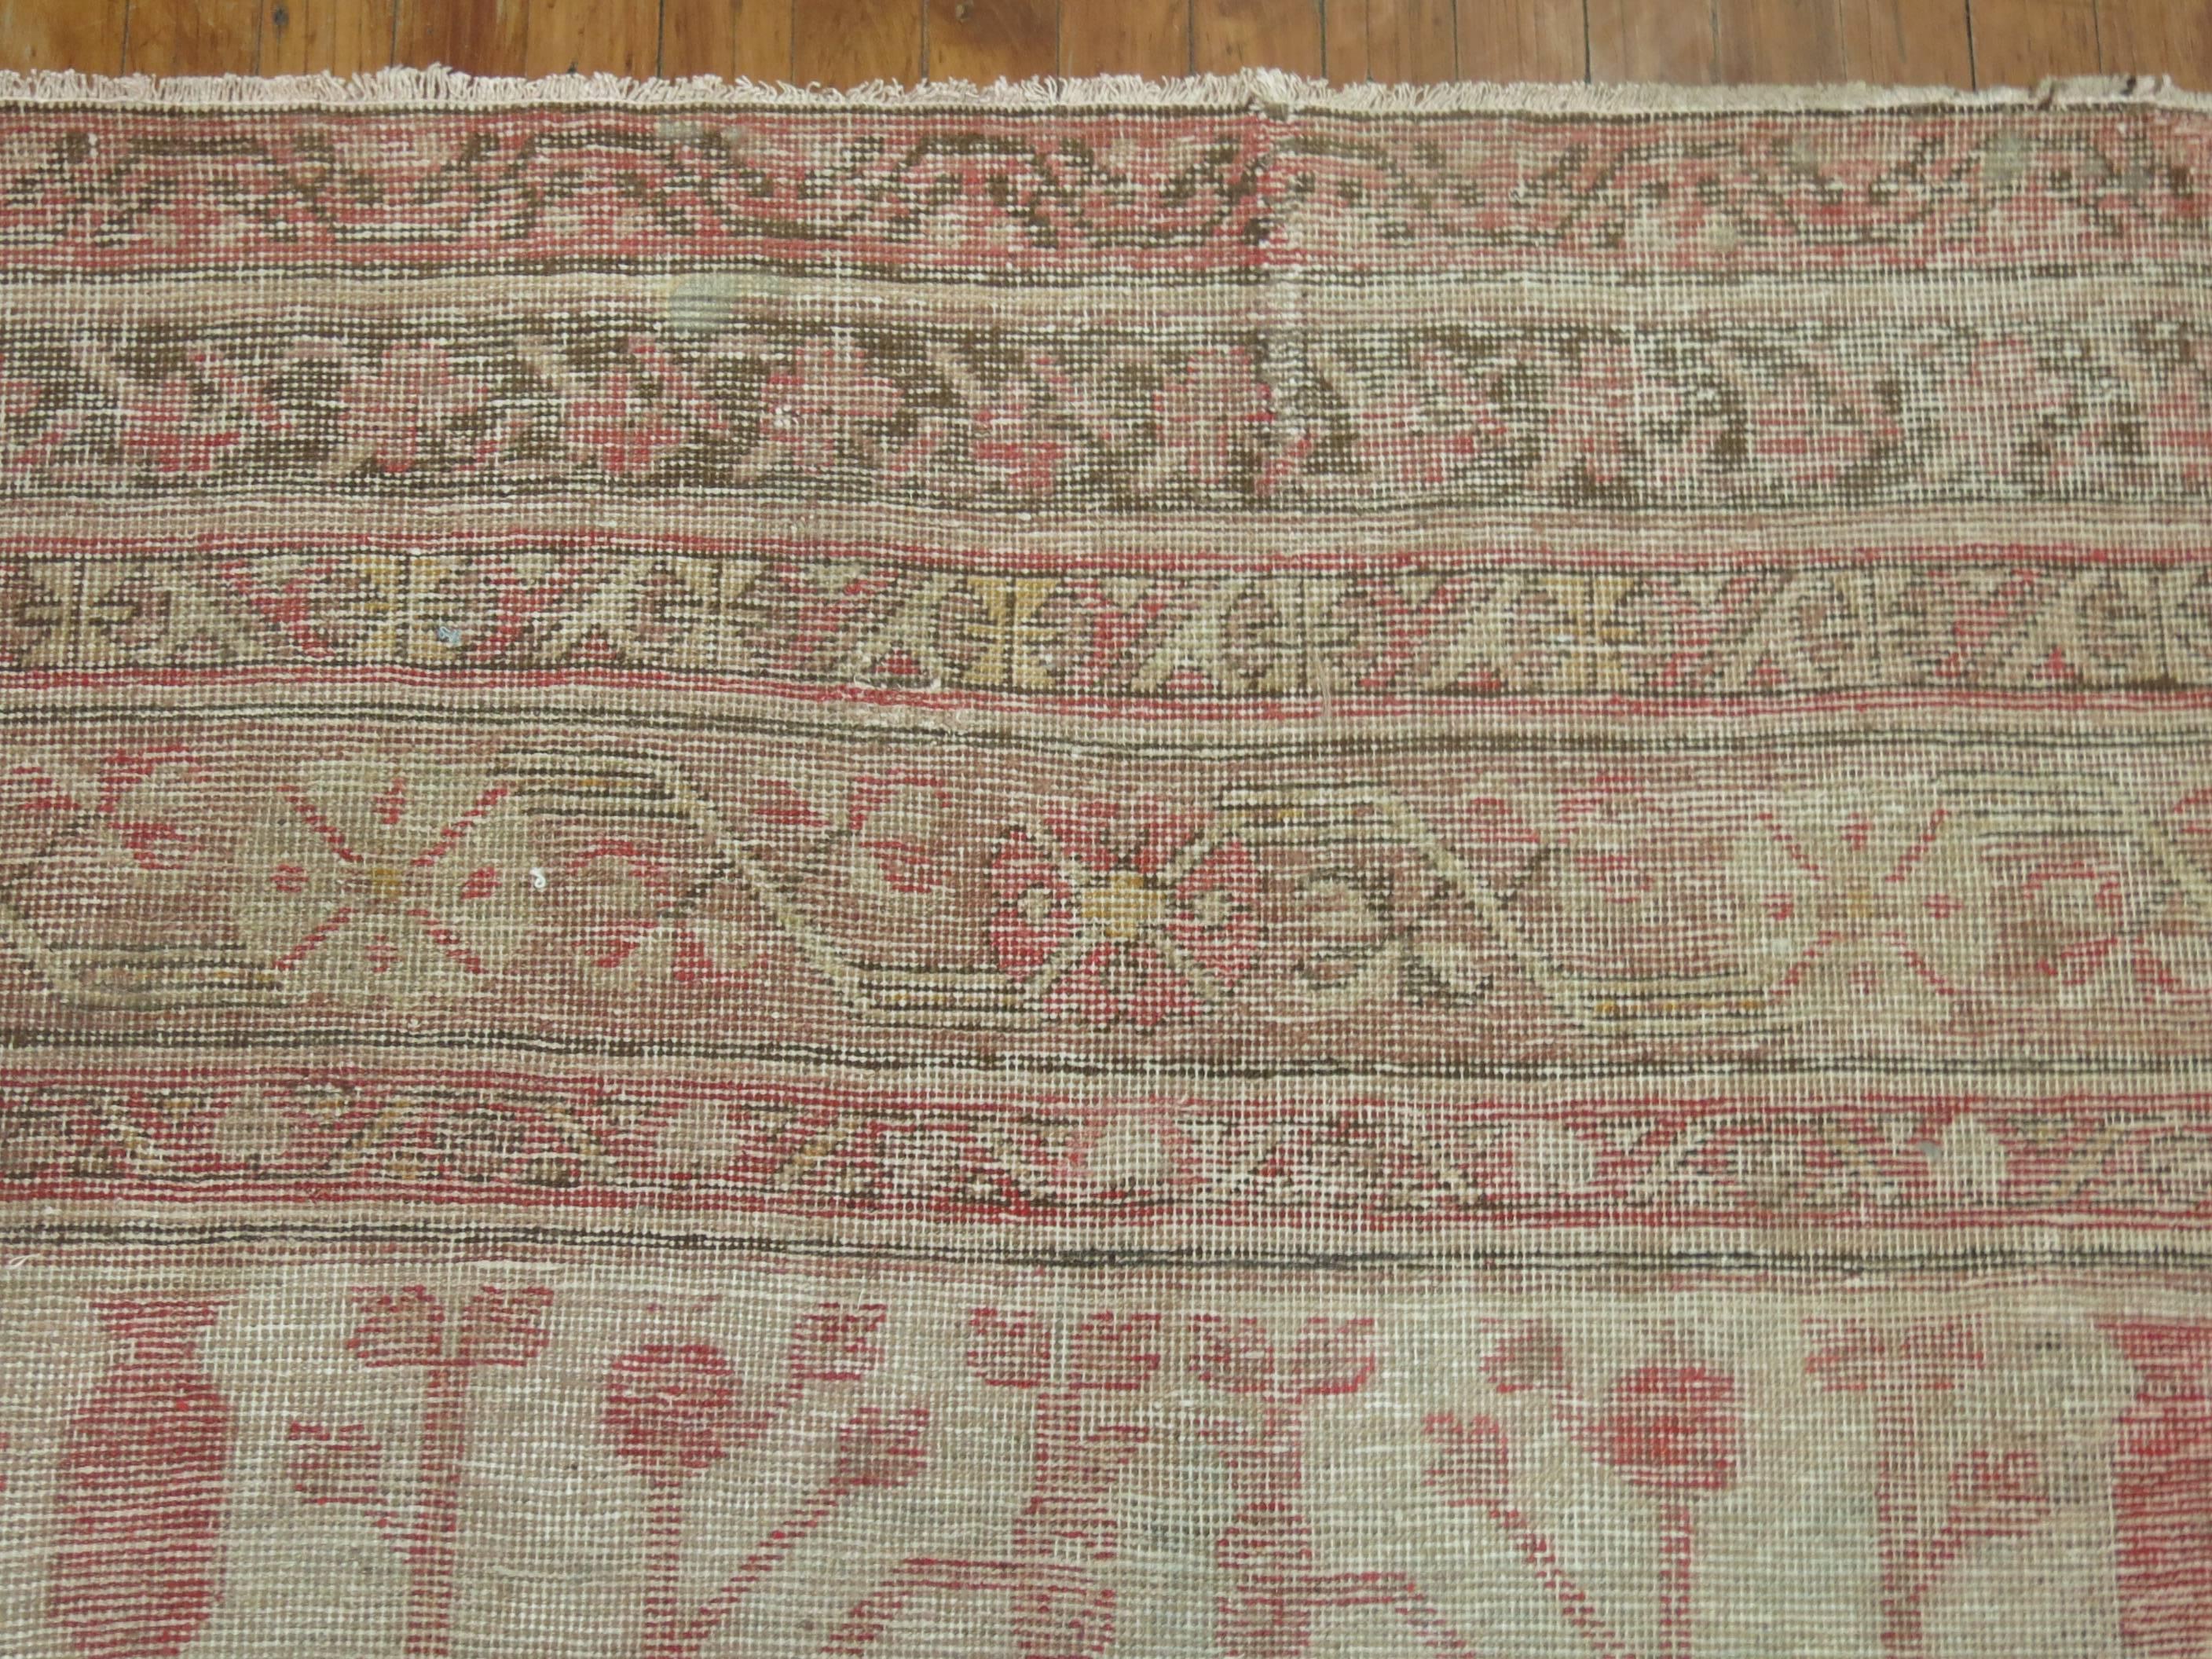 Archaistic Pomegranate Khotan Shabby Chic Late 19th Century Large Gallery Size Rug For Sale